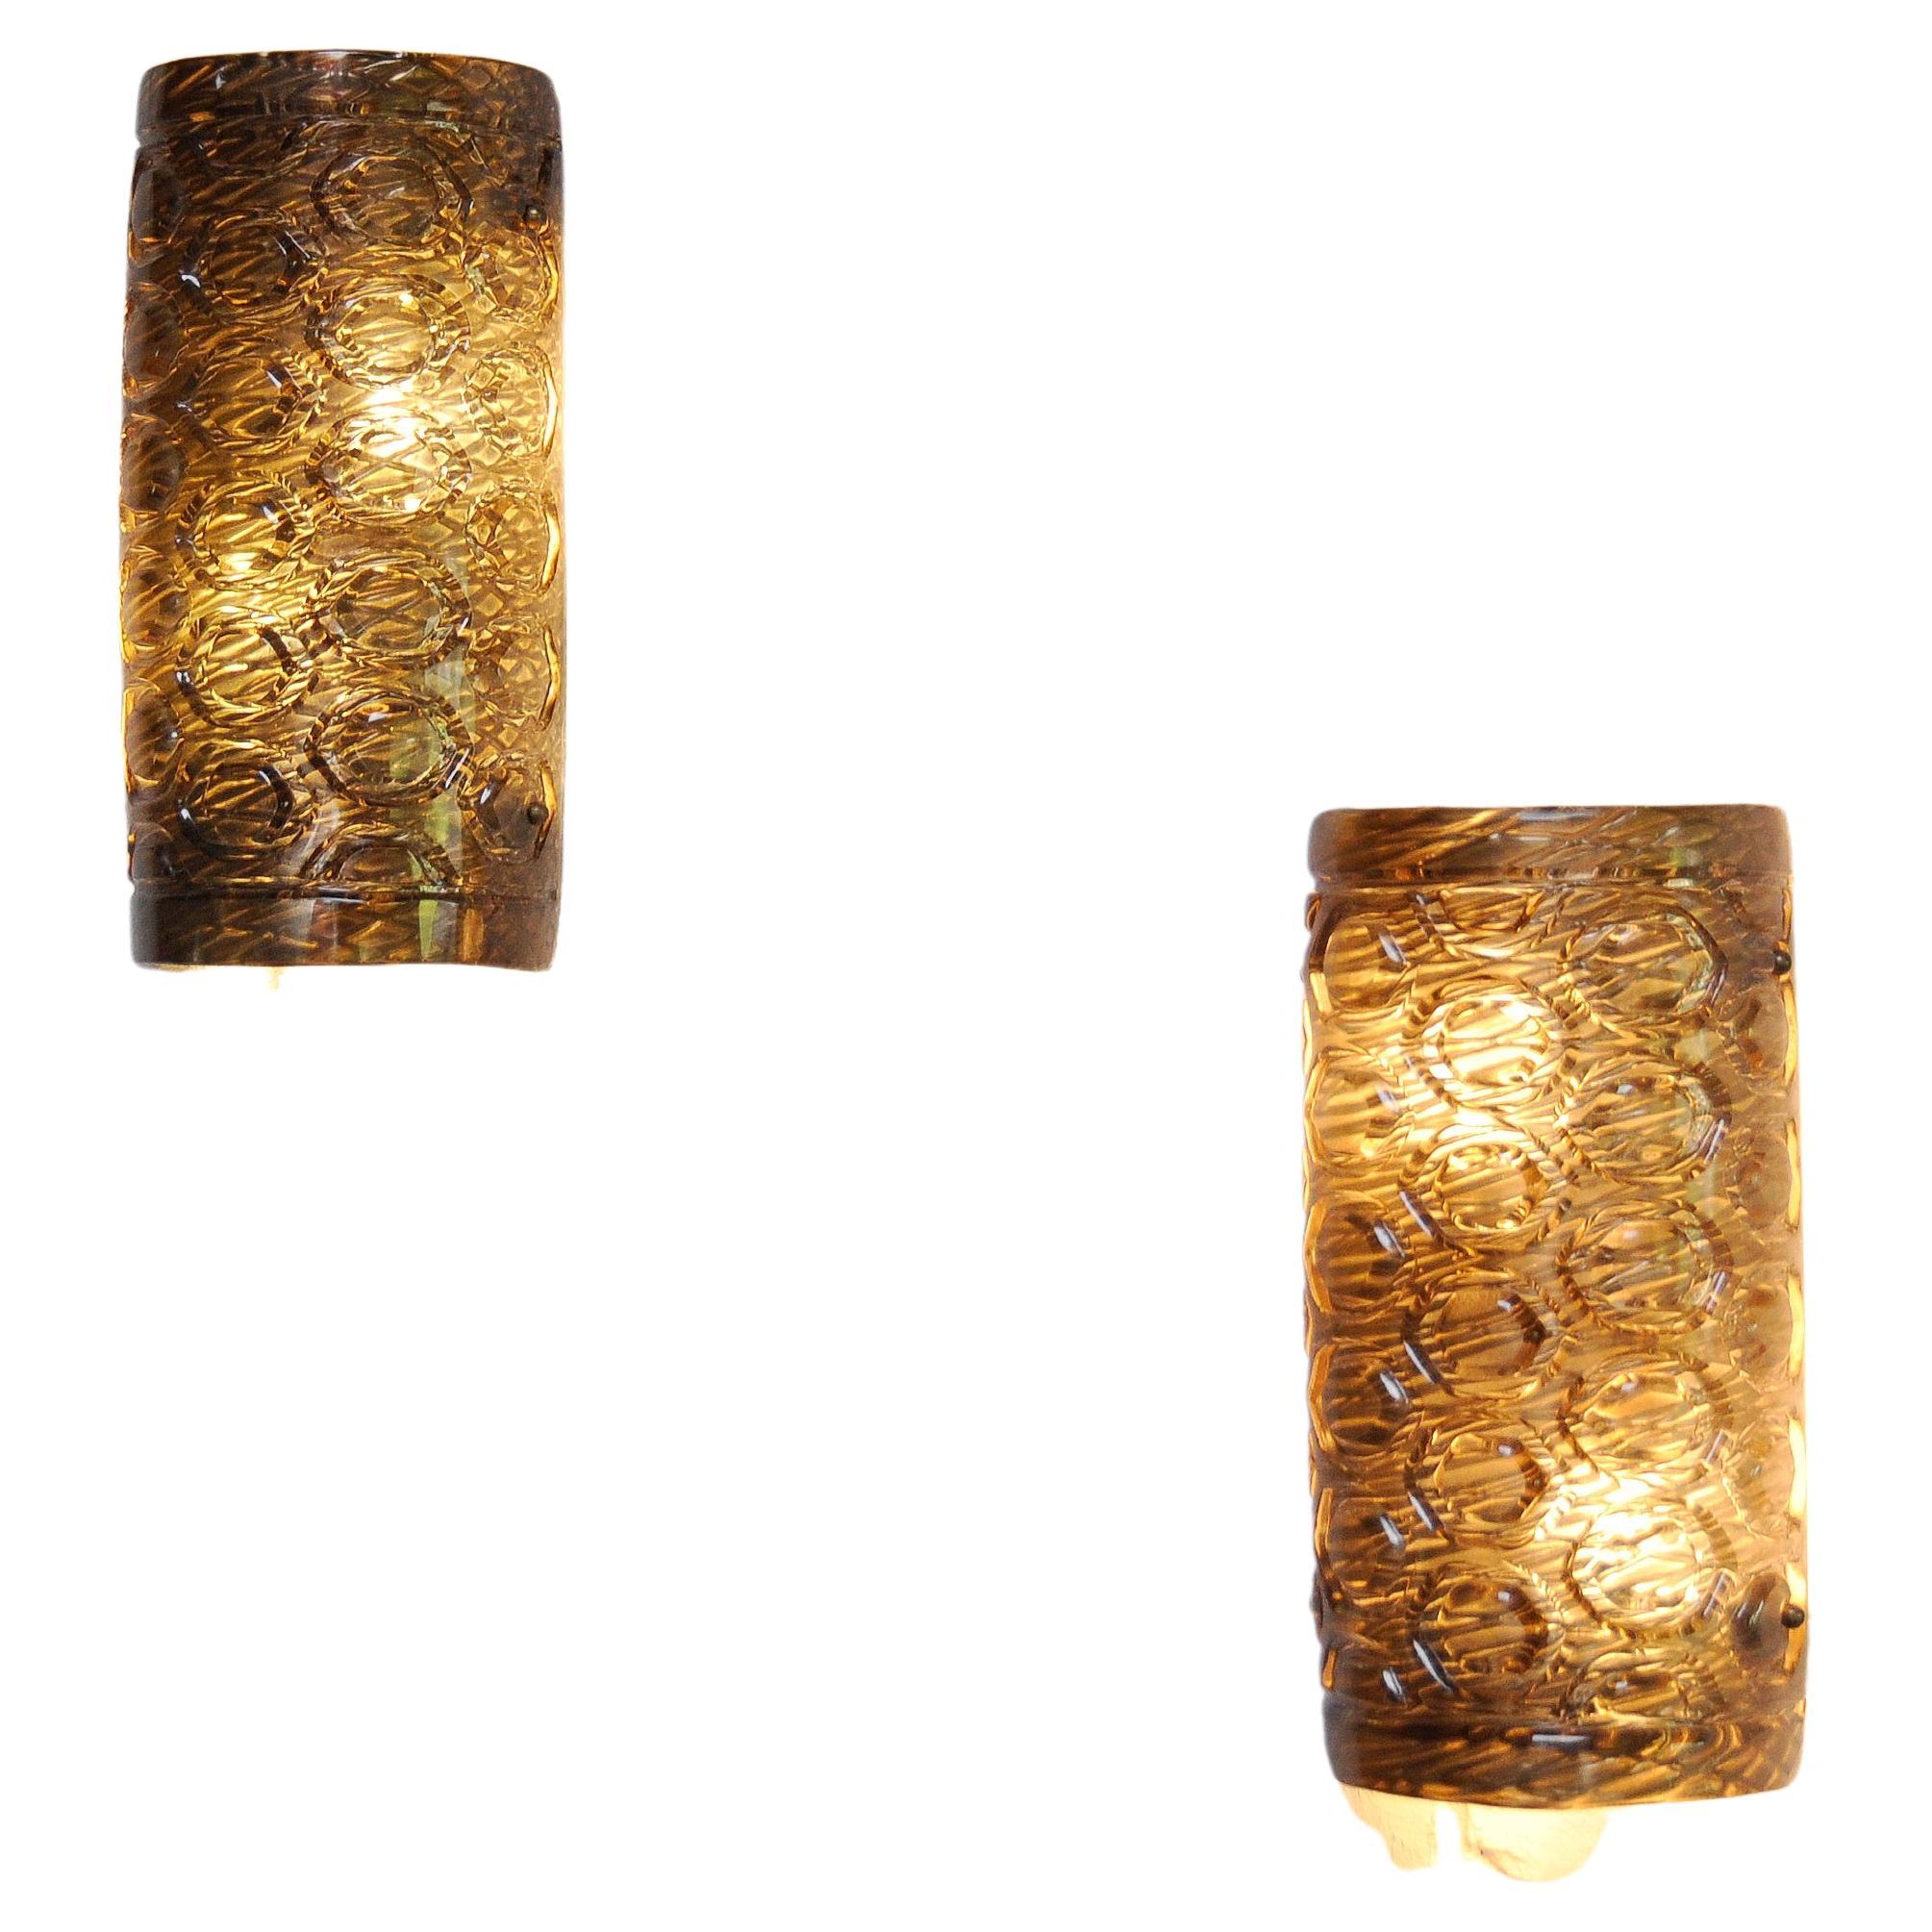 Pair of Italian Murano Glass Wall Lights with Geometric Patterns, 1960's For Sale